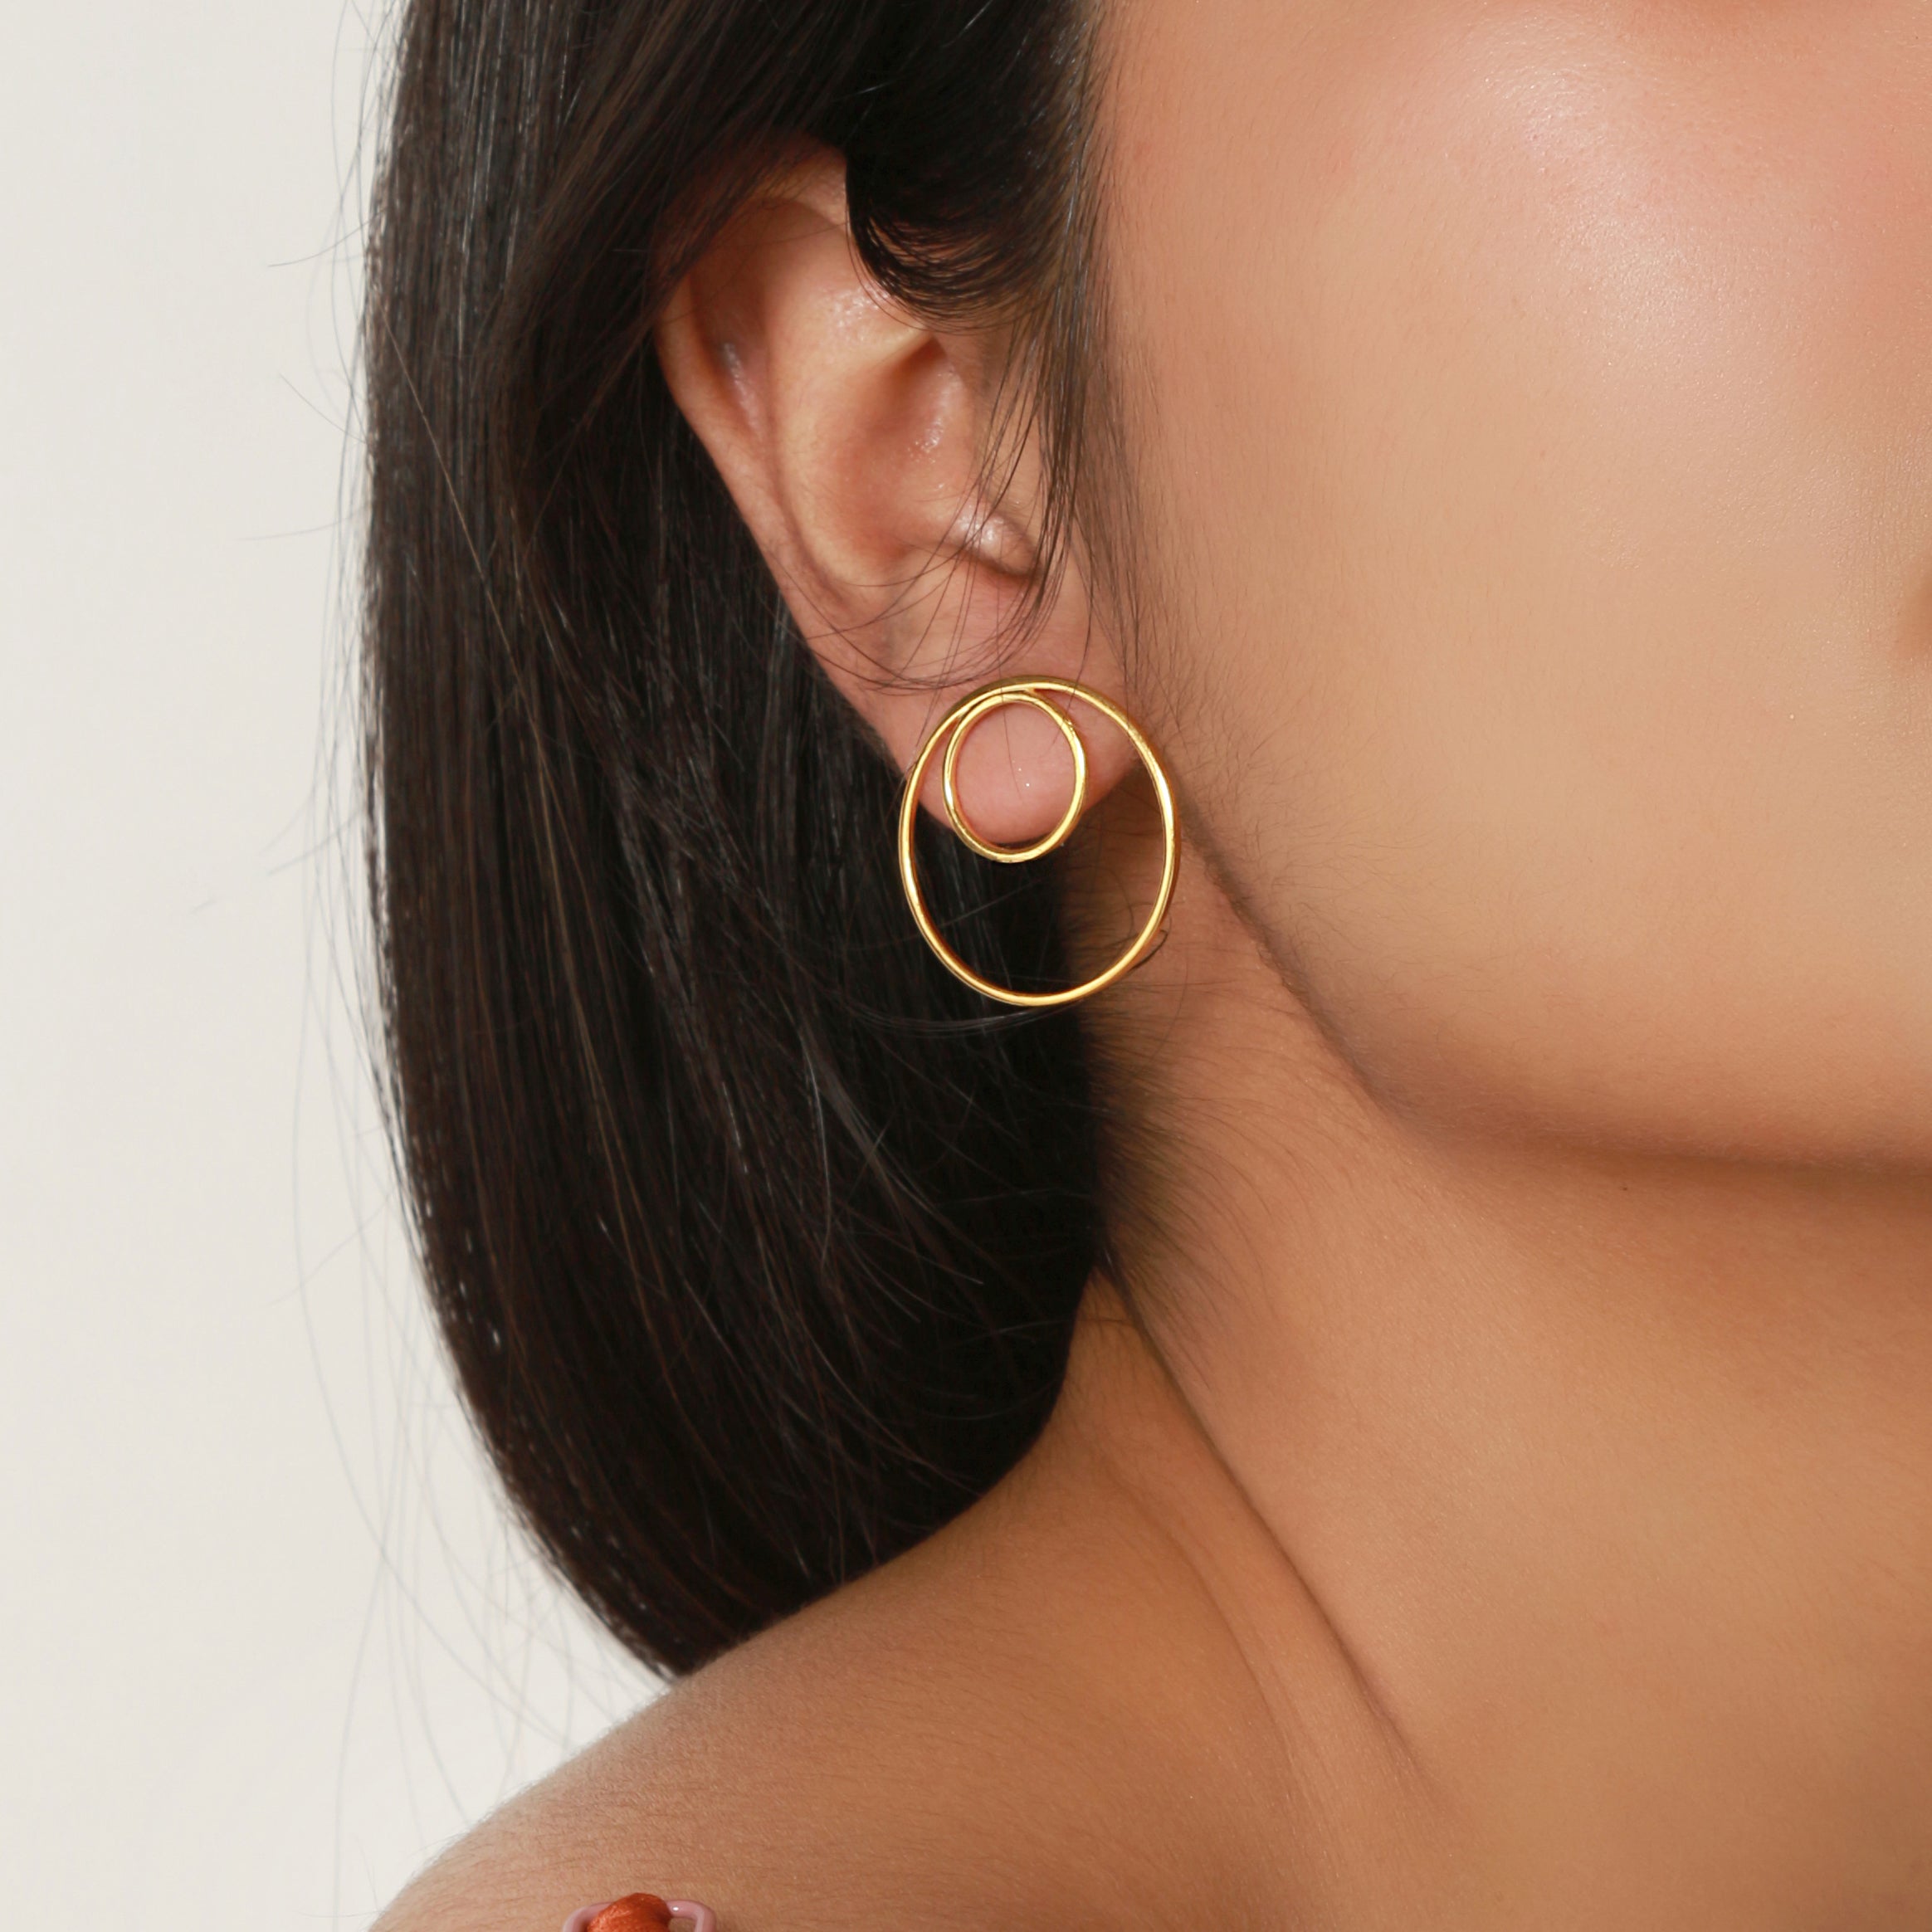 Discover more than 185 small gold drop earrings best